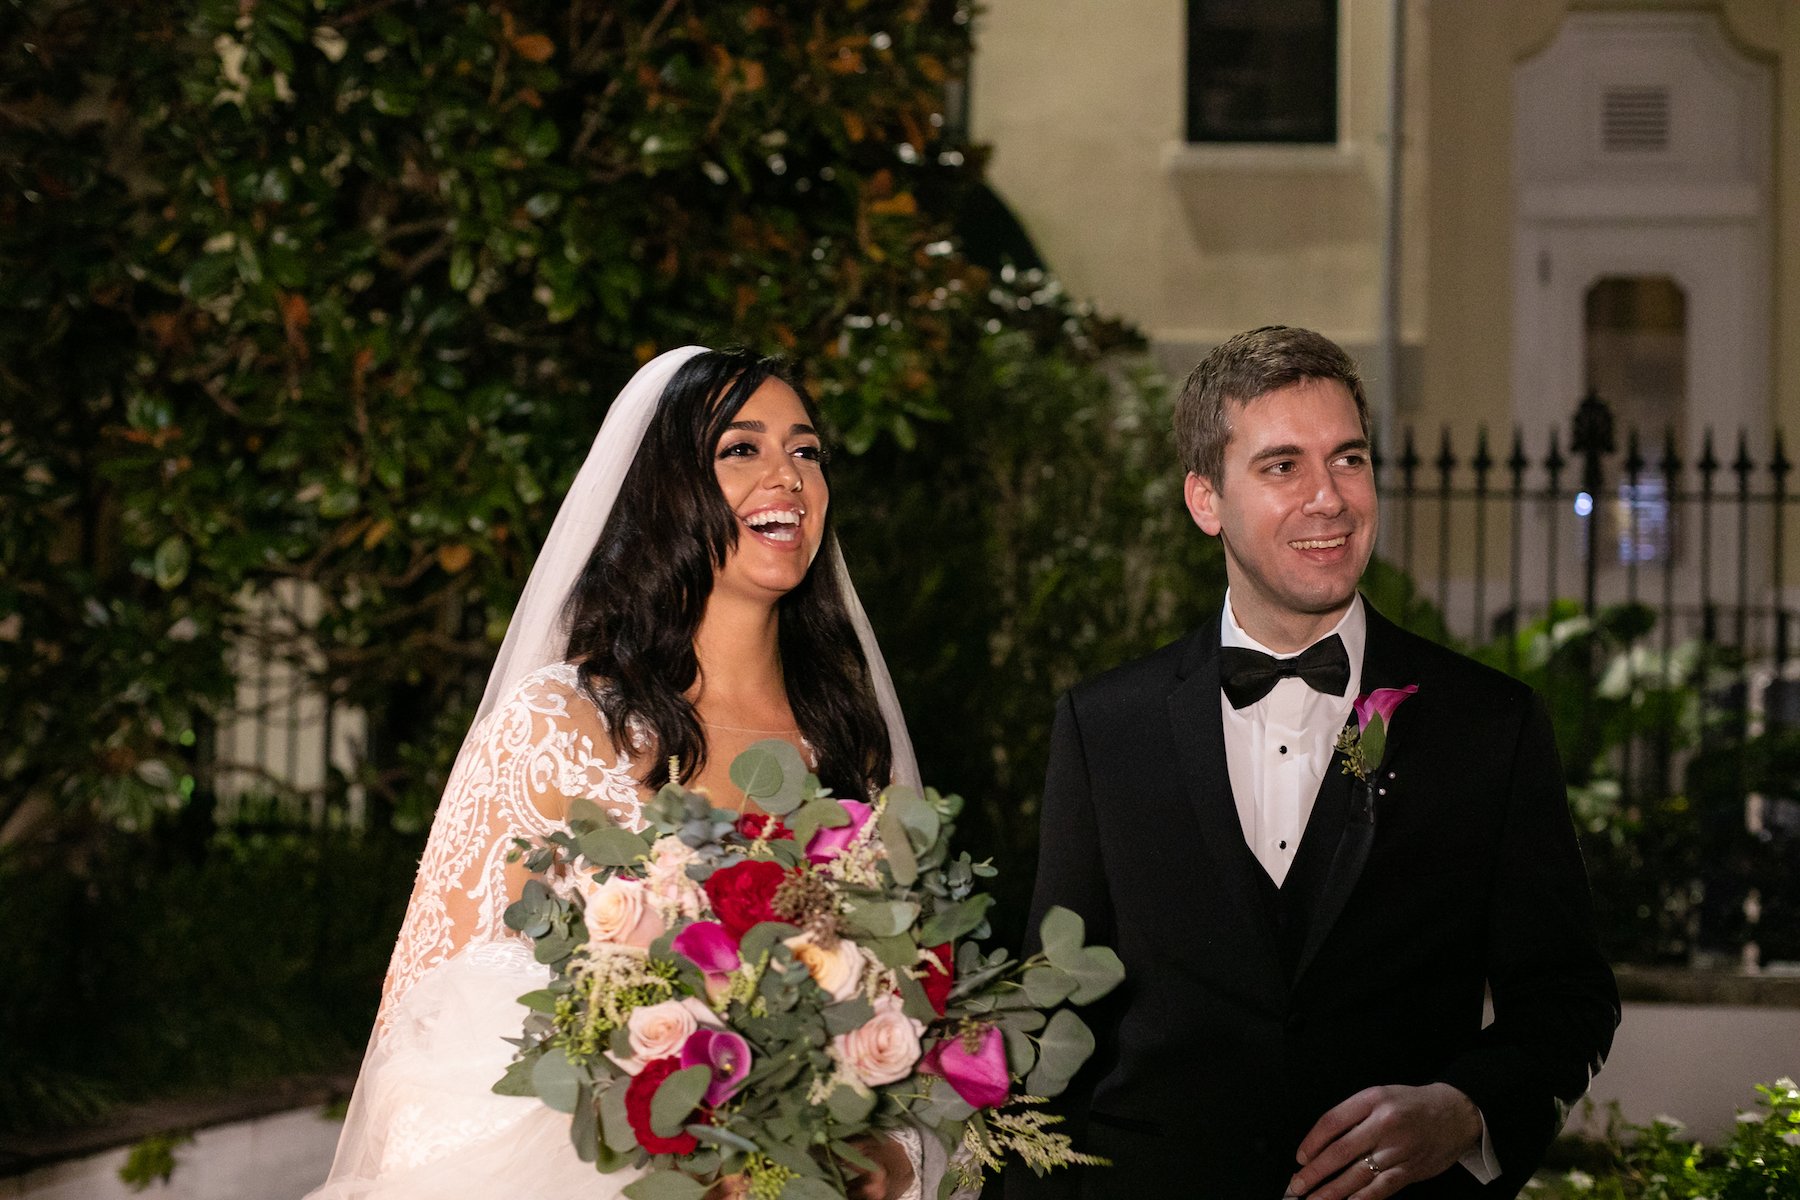 Henry and Christina star in Season 11 of Married At First Sight